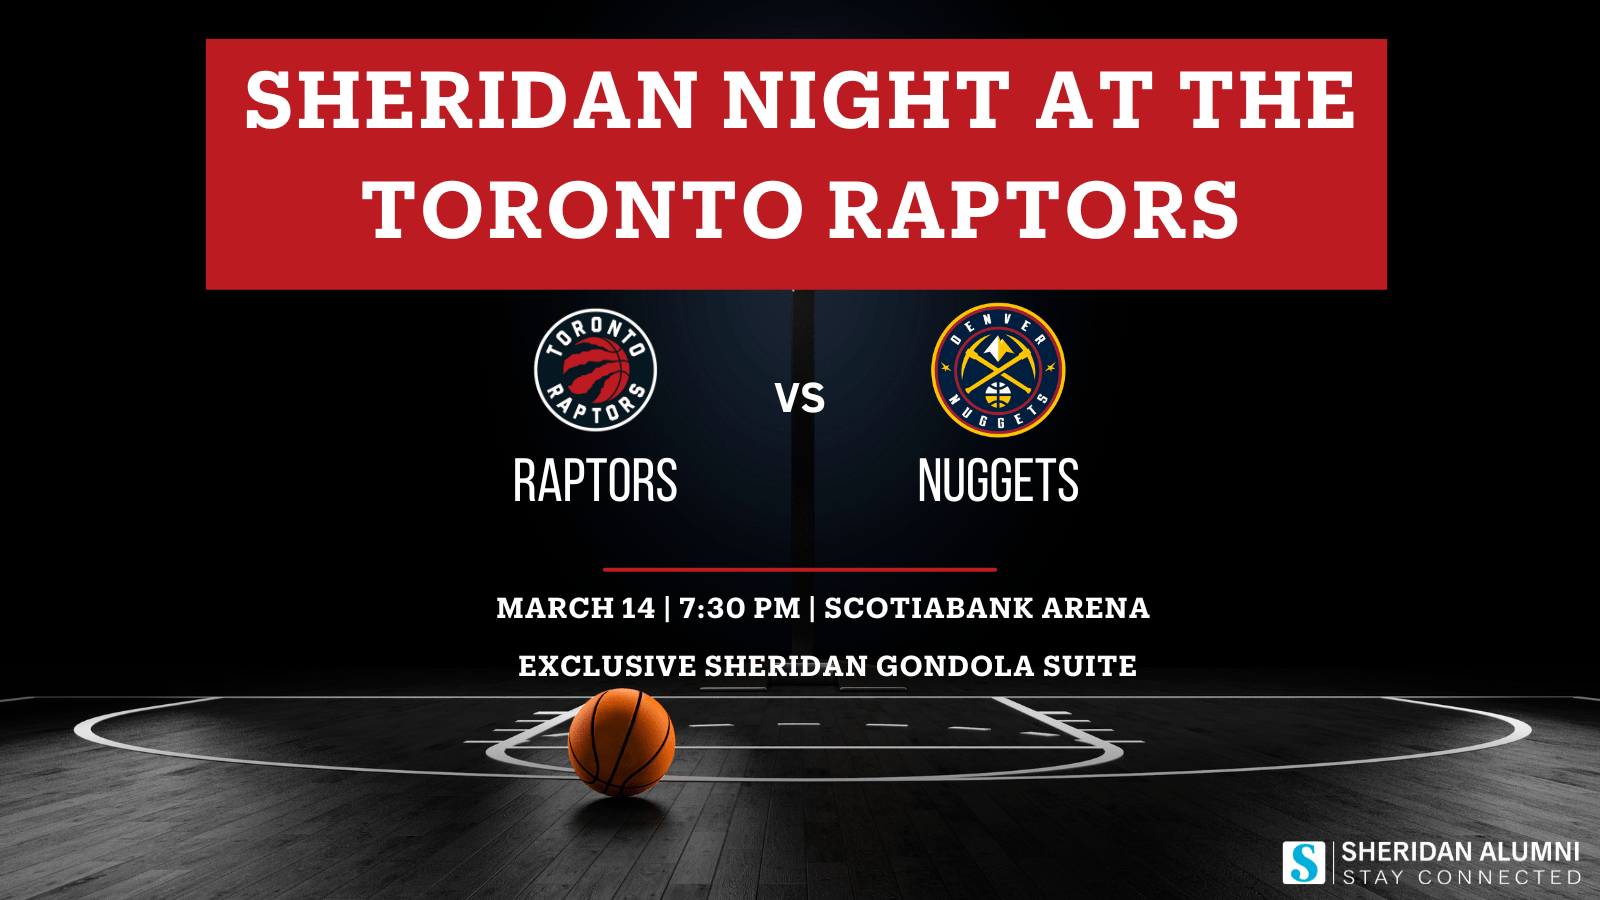 Sheridan Night at the Toronto Raptors | Raptors and Nuggets logos | Basketball sitting on a court